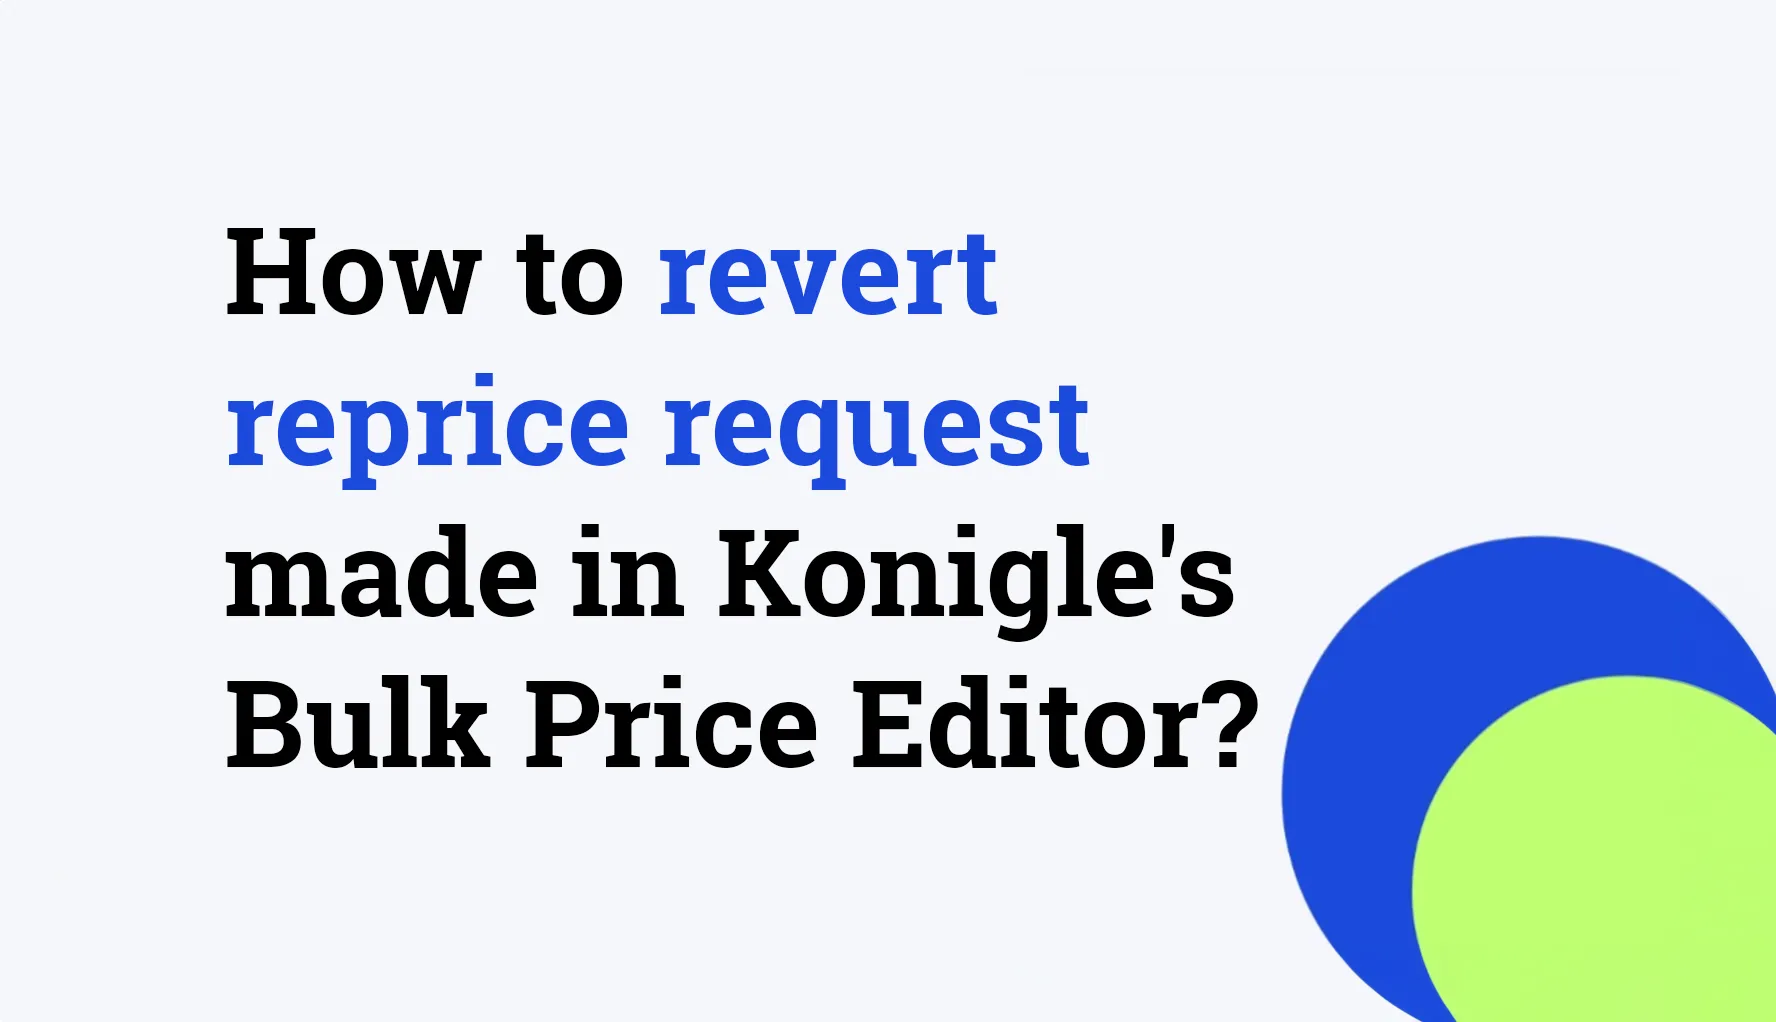 How to revert reprice request made in Konigle's Bulk Price Editor?